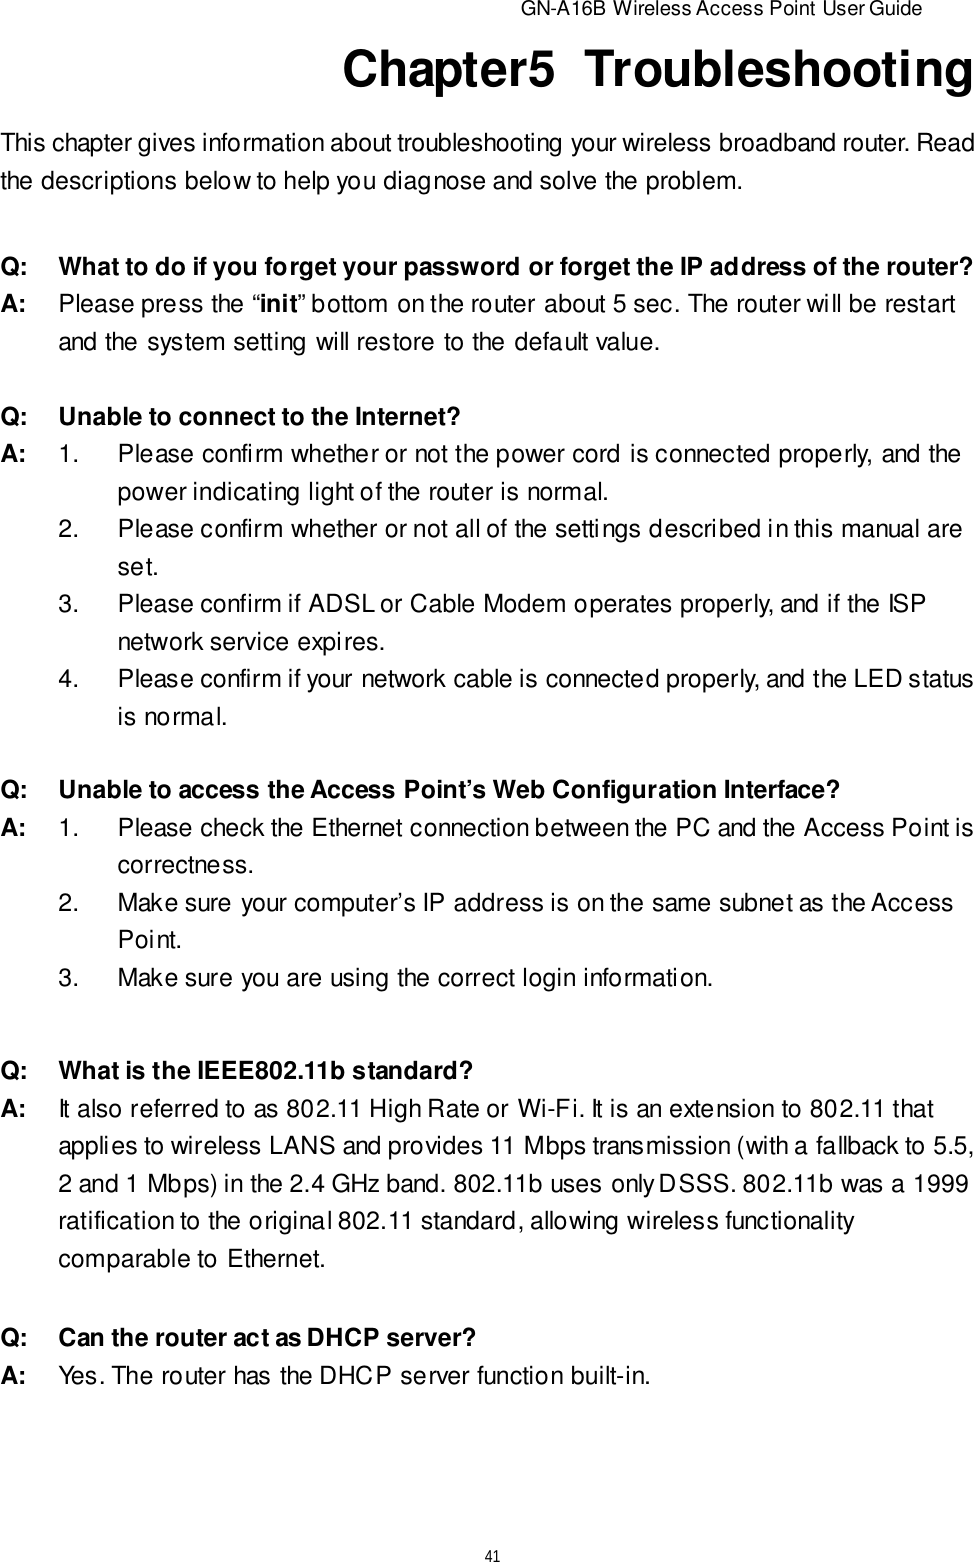                          GN-A16B Wireless Access Point User Guide41Chapter5  TroubleshootingThis chapter gives information about troubleshooting your wireless broadband router. Readthe descriptions below to help you diagnose and solve the problem.Q:What to do if you forget your password or forget the IP address of the router?A:Please press the “init” bottom on the router about 5 sec. The router will be restartand the system setting will restore to the default value.Q:Unable to connect to the Internet?A:1.Please confirm whether or not the power cord is connected properly, and thepower indicating light of the router is normal.2.Please confirm whether or not all of the settings described in this manual areset.3.Please confirm if ADSL or Cable Modem operates properly, and if the ISPnetwork service expires.4.Please confirm if your network cable is connected properly, and the LED statusis normal.Q:What is the IEEE802.11b standard?A:It also referred to as 802.11 High Rate or Wi-Fi. It is an extension to 802.11 thatapplies to wireless LANS and provides 11 Mbps transmission (with a fallback to 5.5,2 and 1 Mbps) in the 2.4 GHz band. 802.11b uses only DSSS. 802.11b was a 1999ratification to the original 802.11 standard, allowing wireless functionalitycomparable to Ethernet.Q:Unable to access the Access Point’s Web Configuration Interface?A:1.Please check the Ethernet connection between the PC and the Access Point iscorrectness.2.Make sure your computer’s IP address is on the same subnet as the AccessPoint.3.Make sure you are using the correct login information.Q:Can the router act as DHCP server?A:Yes. The router has the DHCP server function built-in.